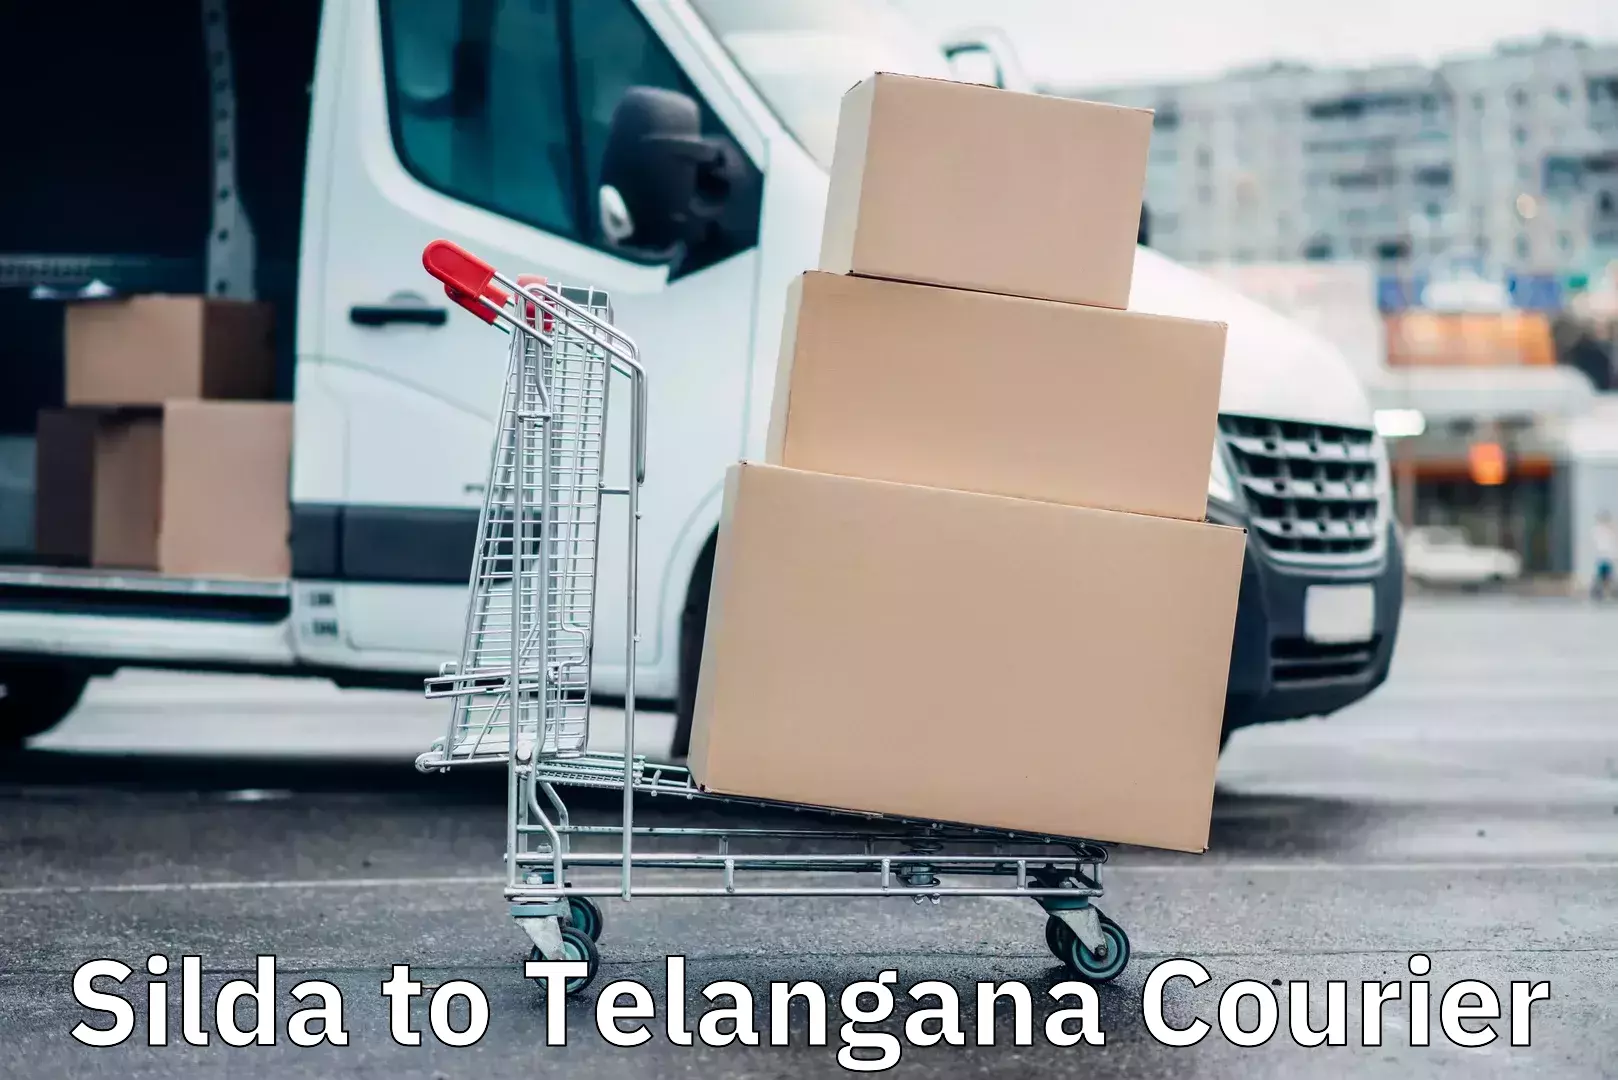 Efficient package consolidation Silda to Telangana